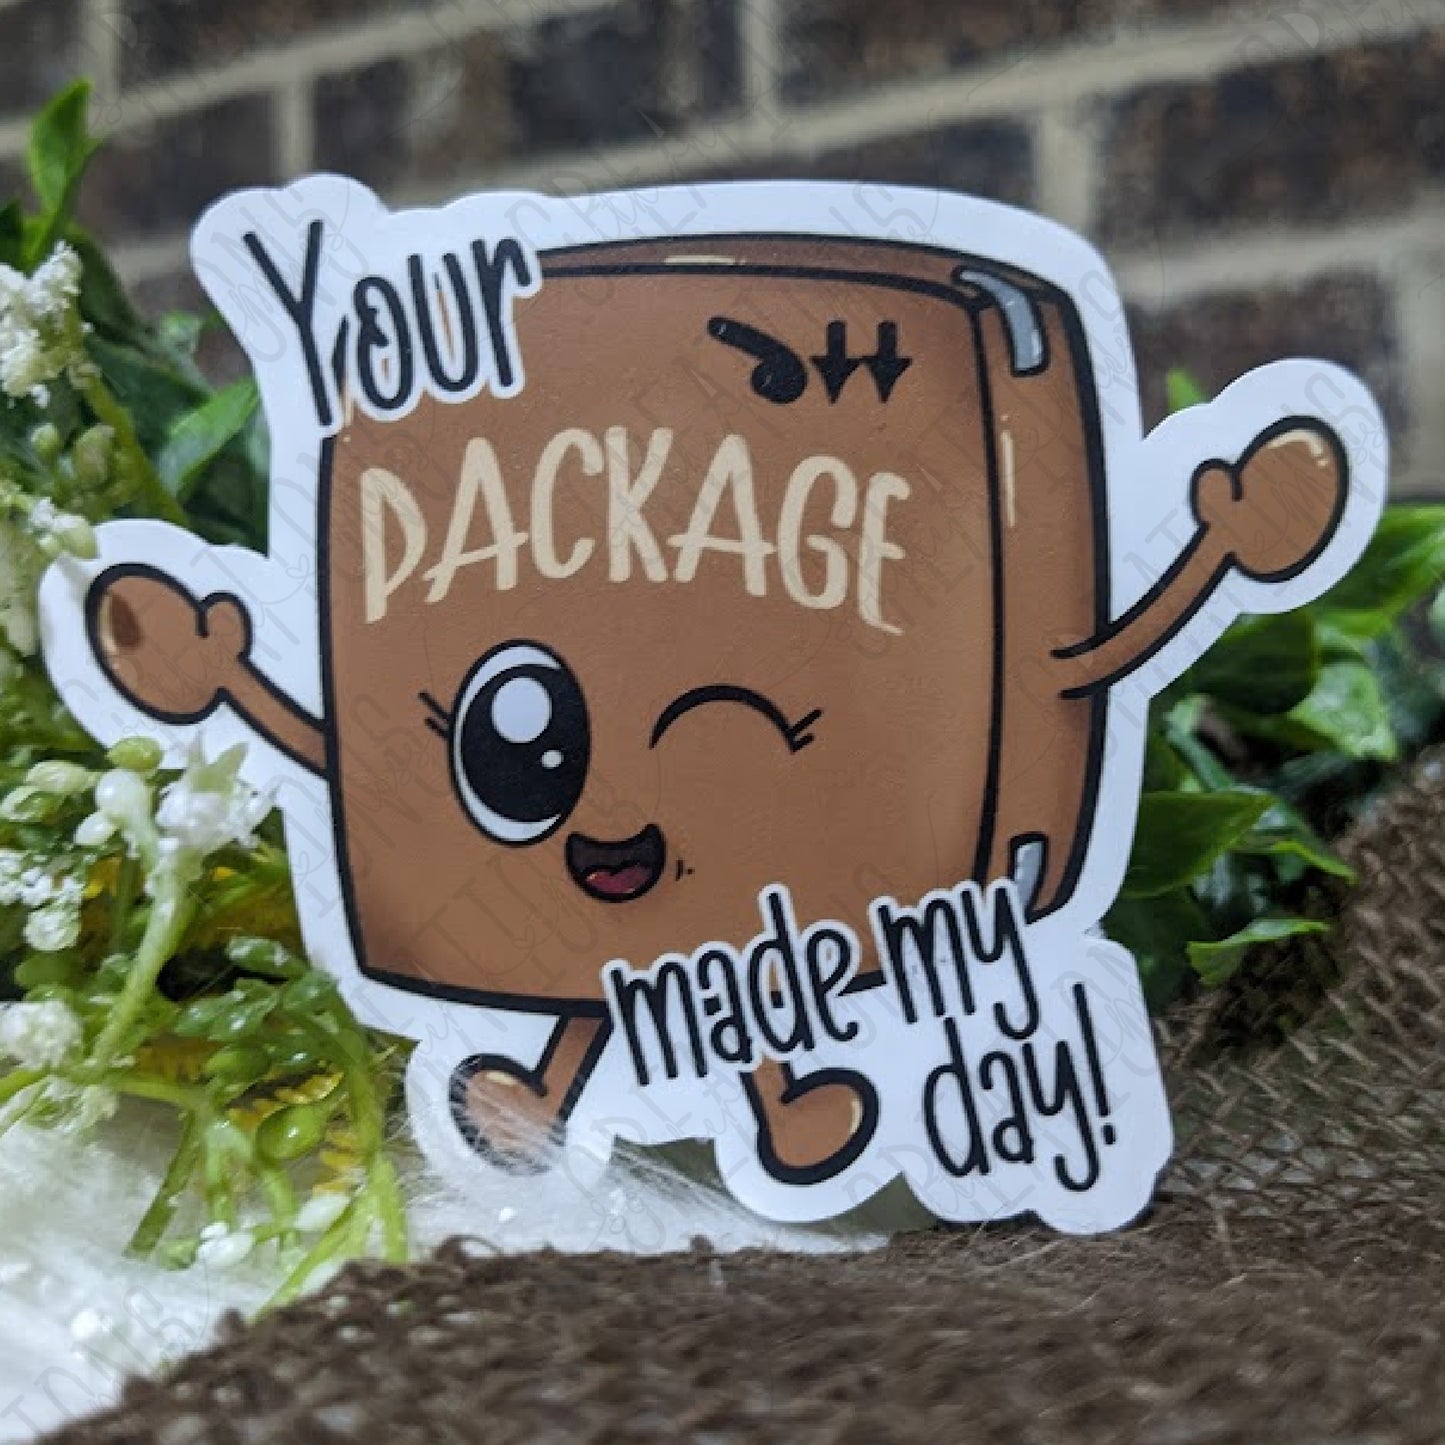 NSFW: Your Package Made My Day